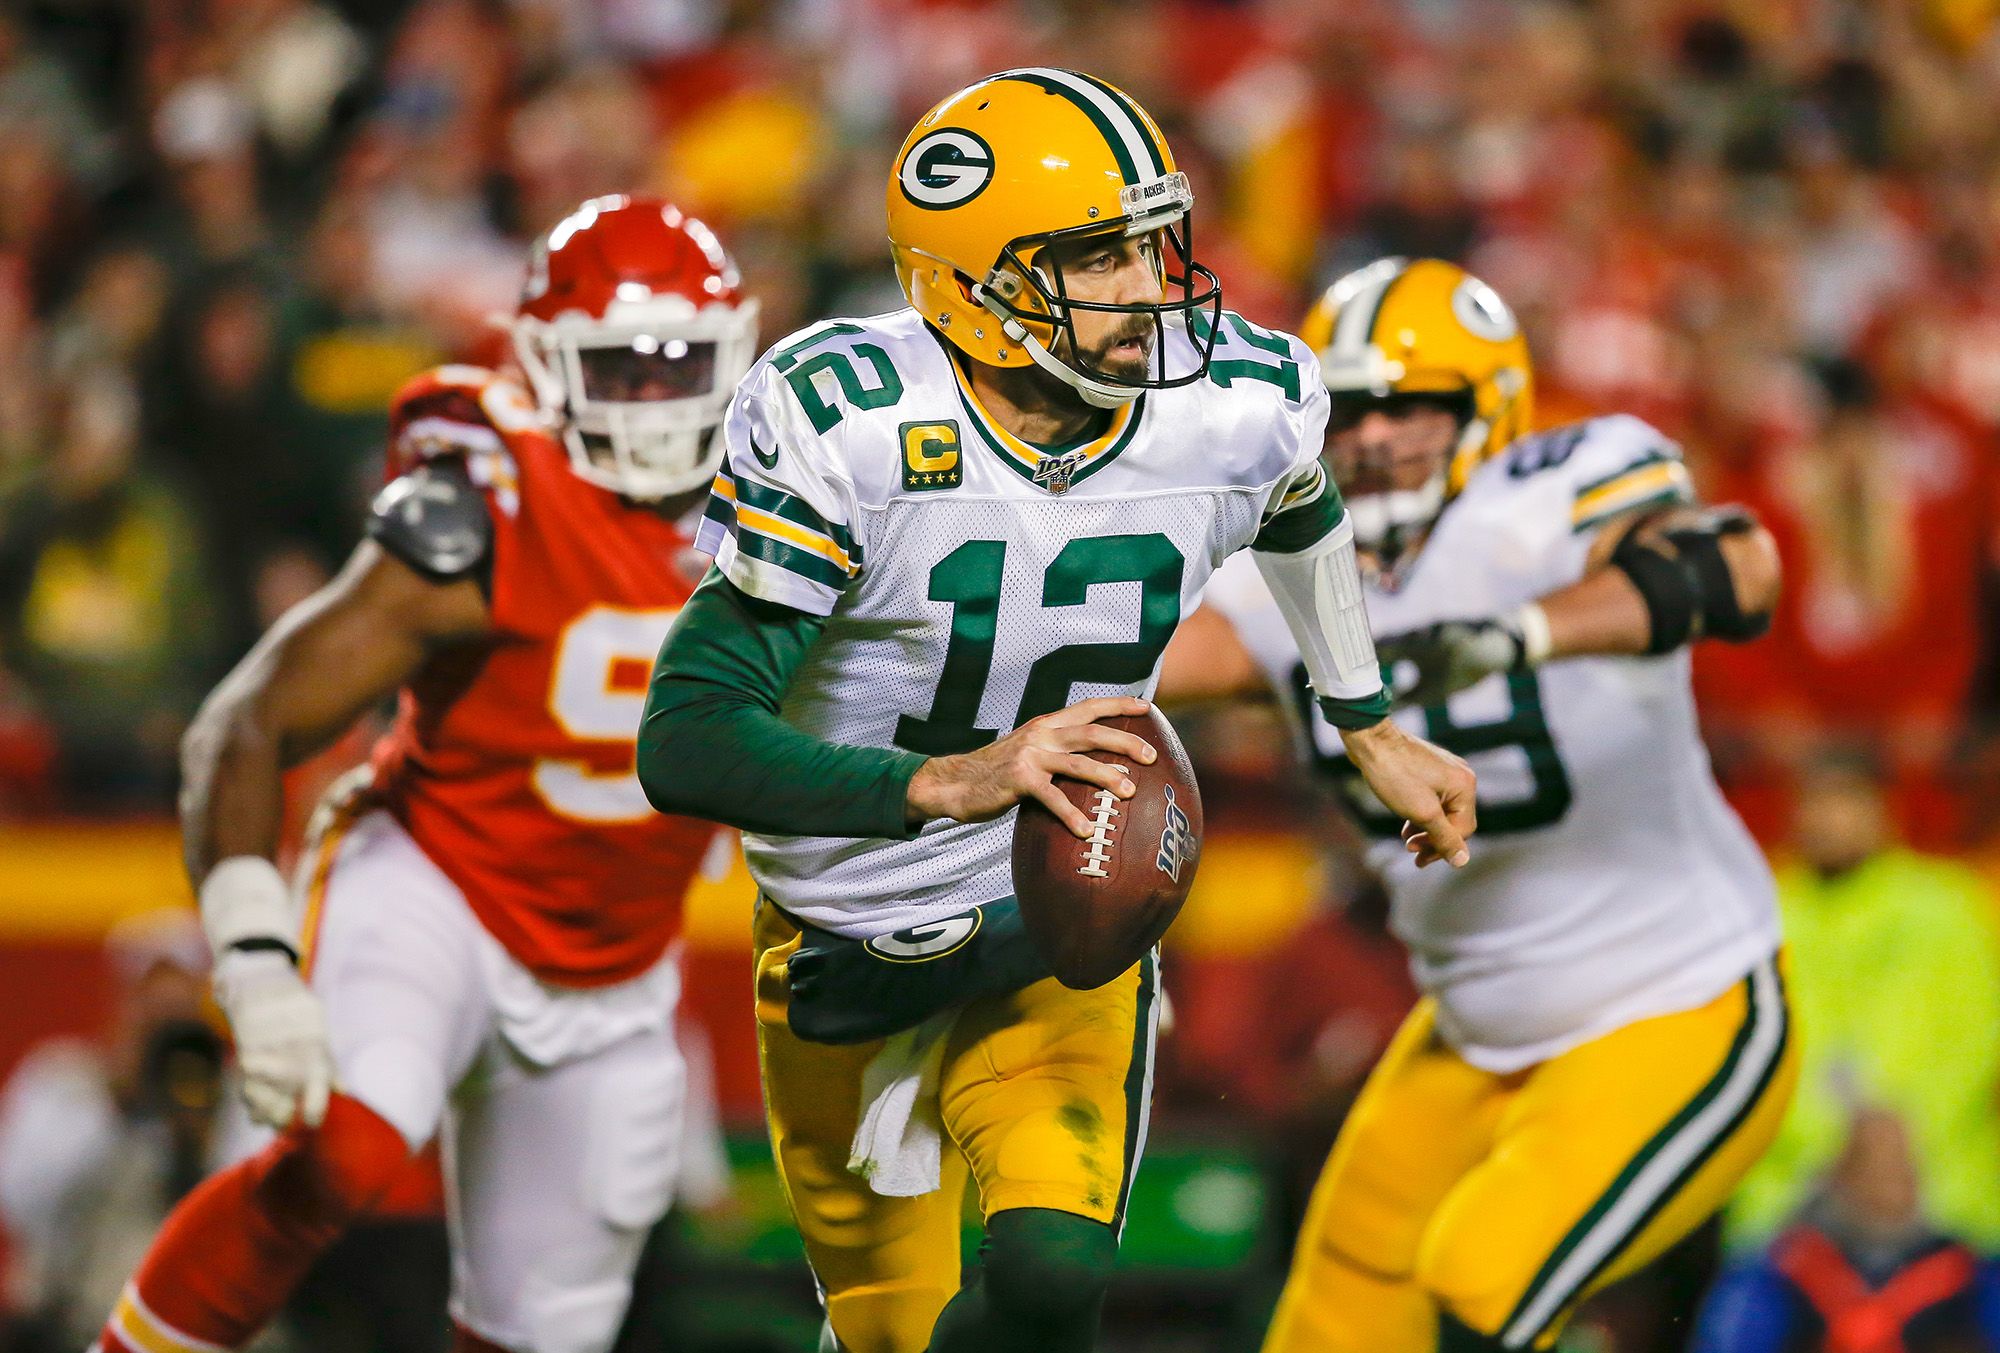 nfl green bay packers aaron rodgers